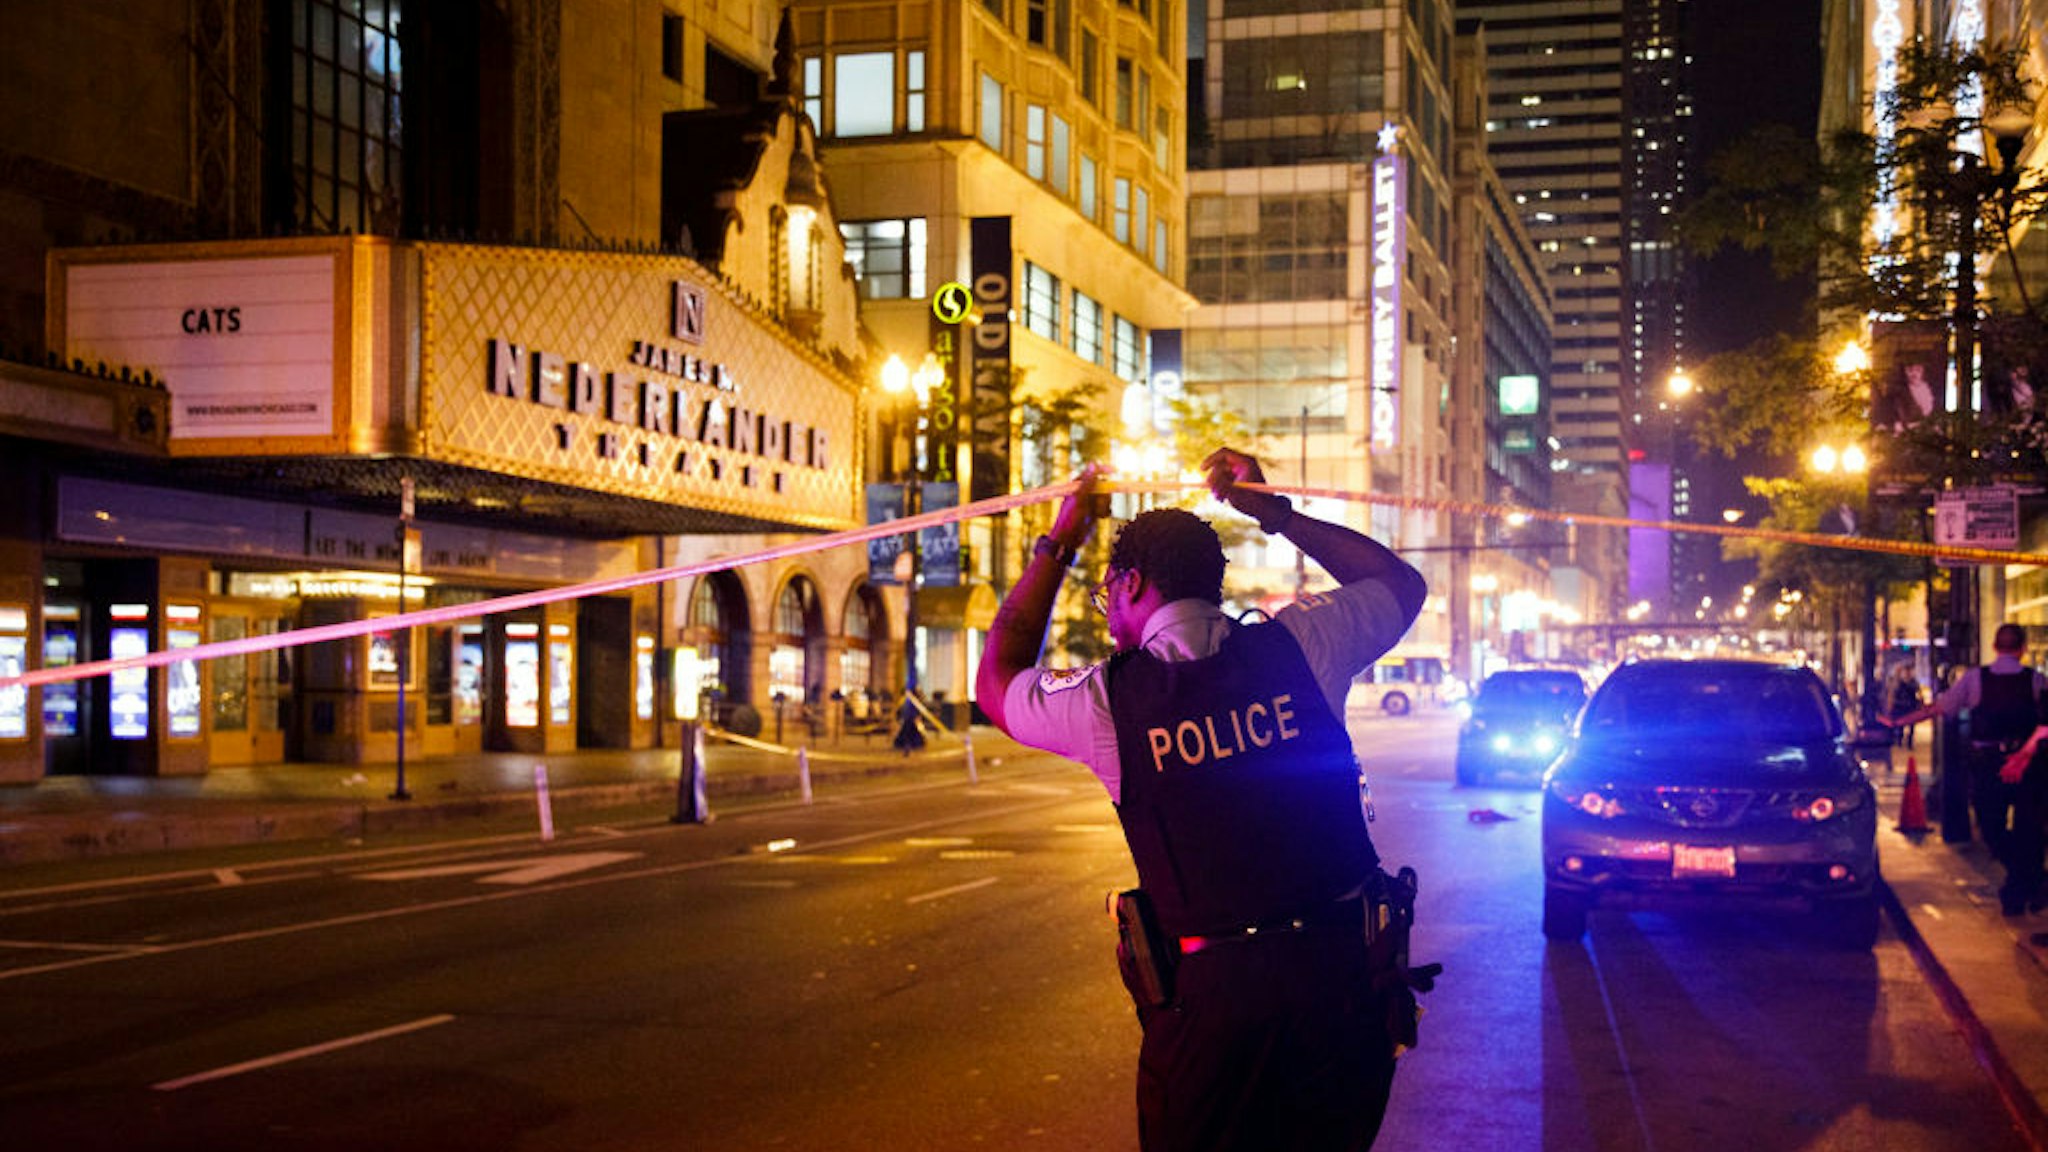 Chicago's top cop laments violence as 66 shot, 5 fatally, over long Fourth of July weekend